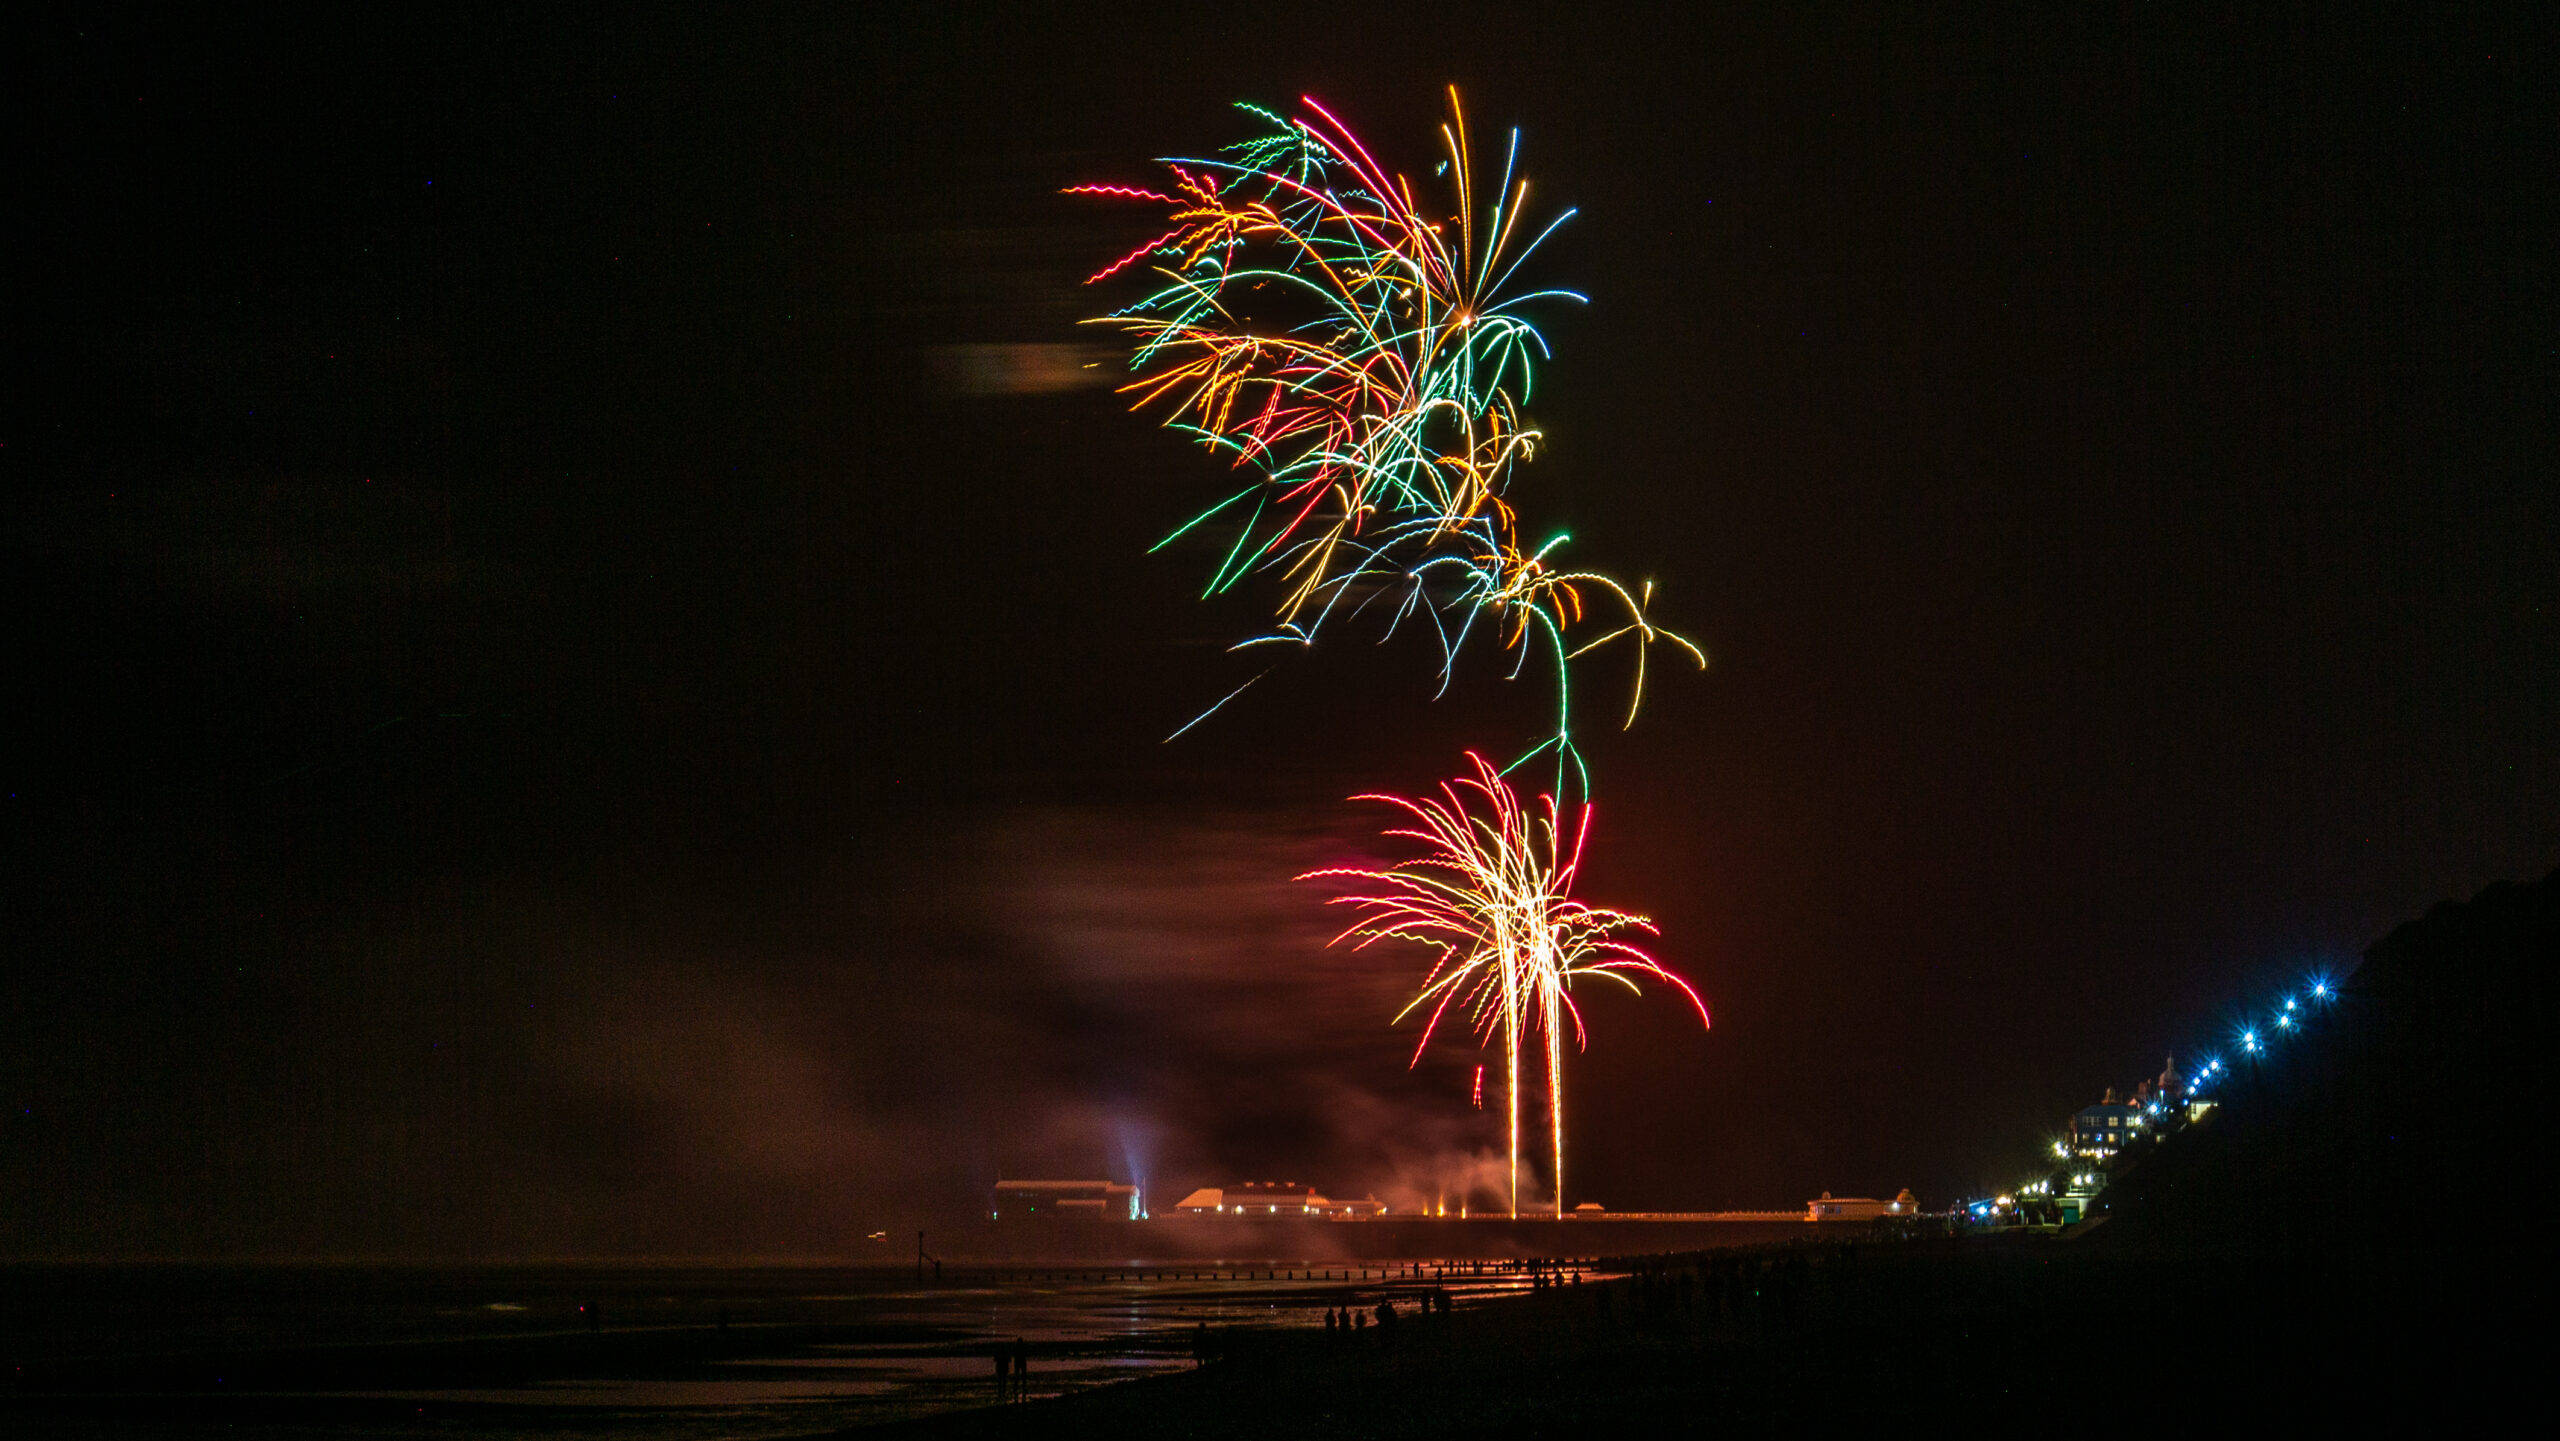 New Year's Day Fireworks over the Cromer Pier in Norfolk